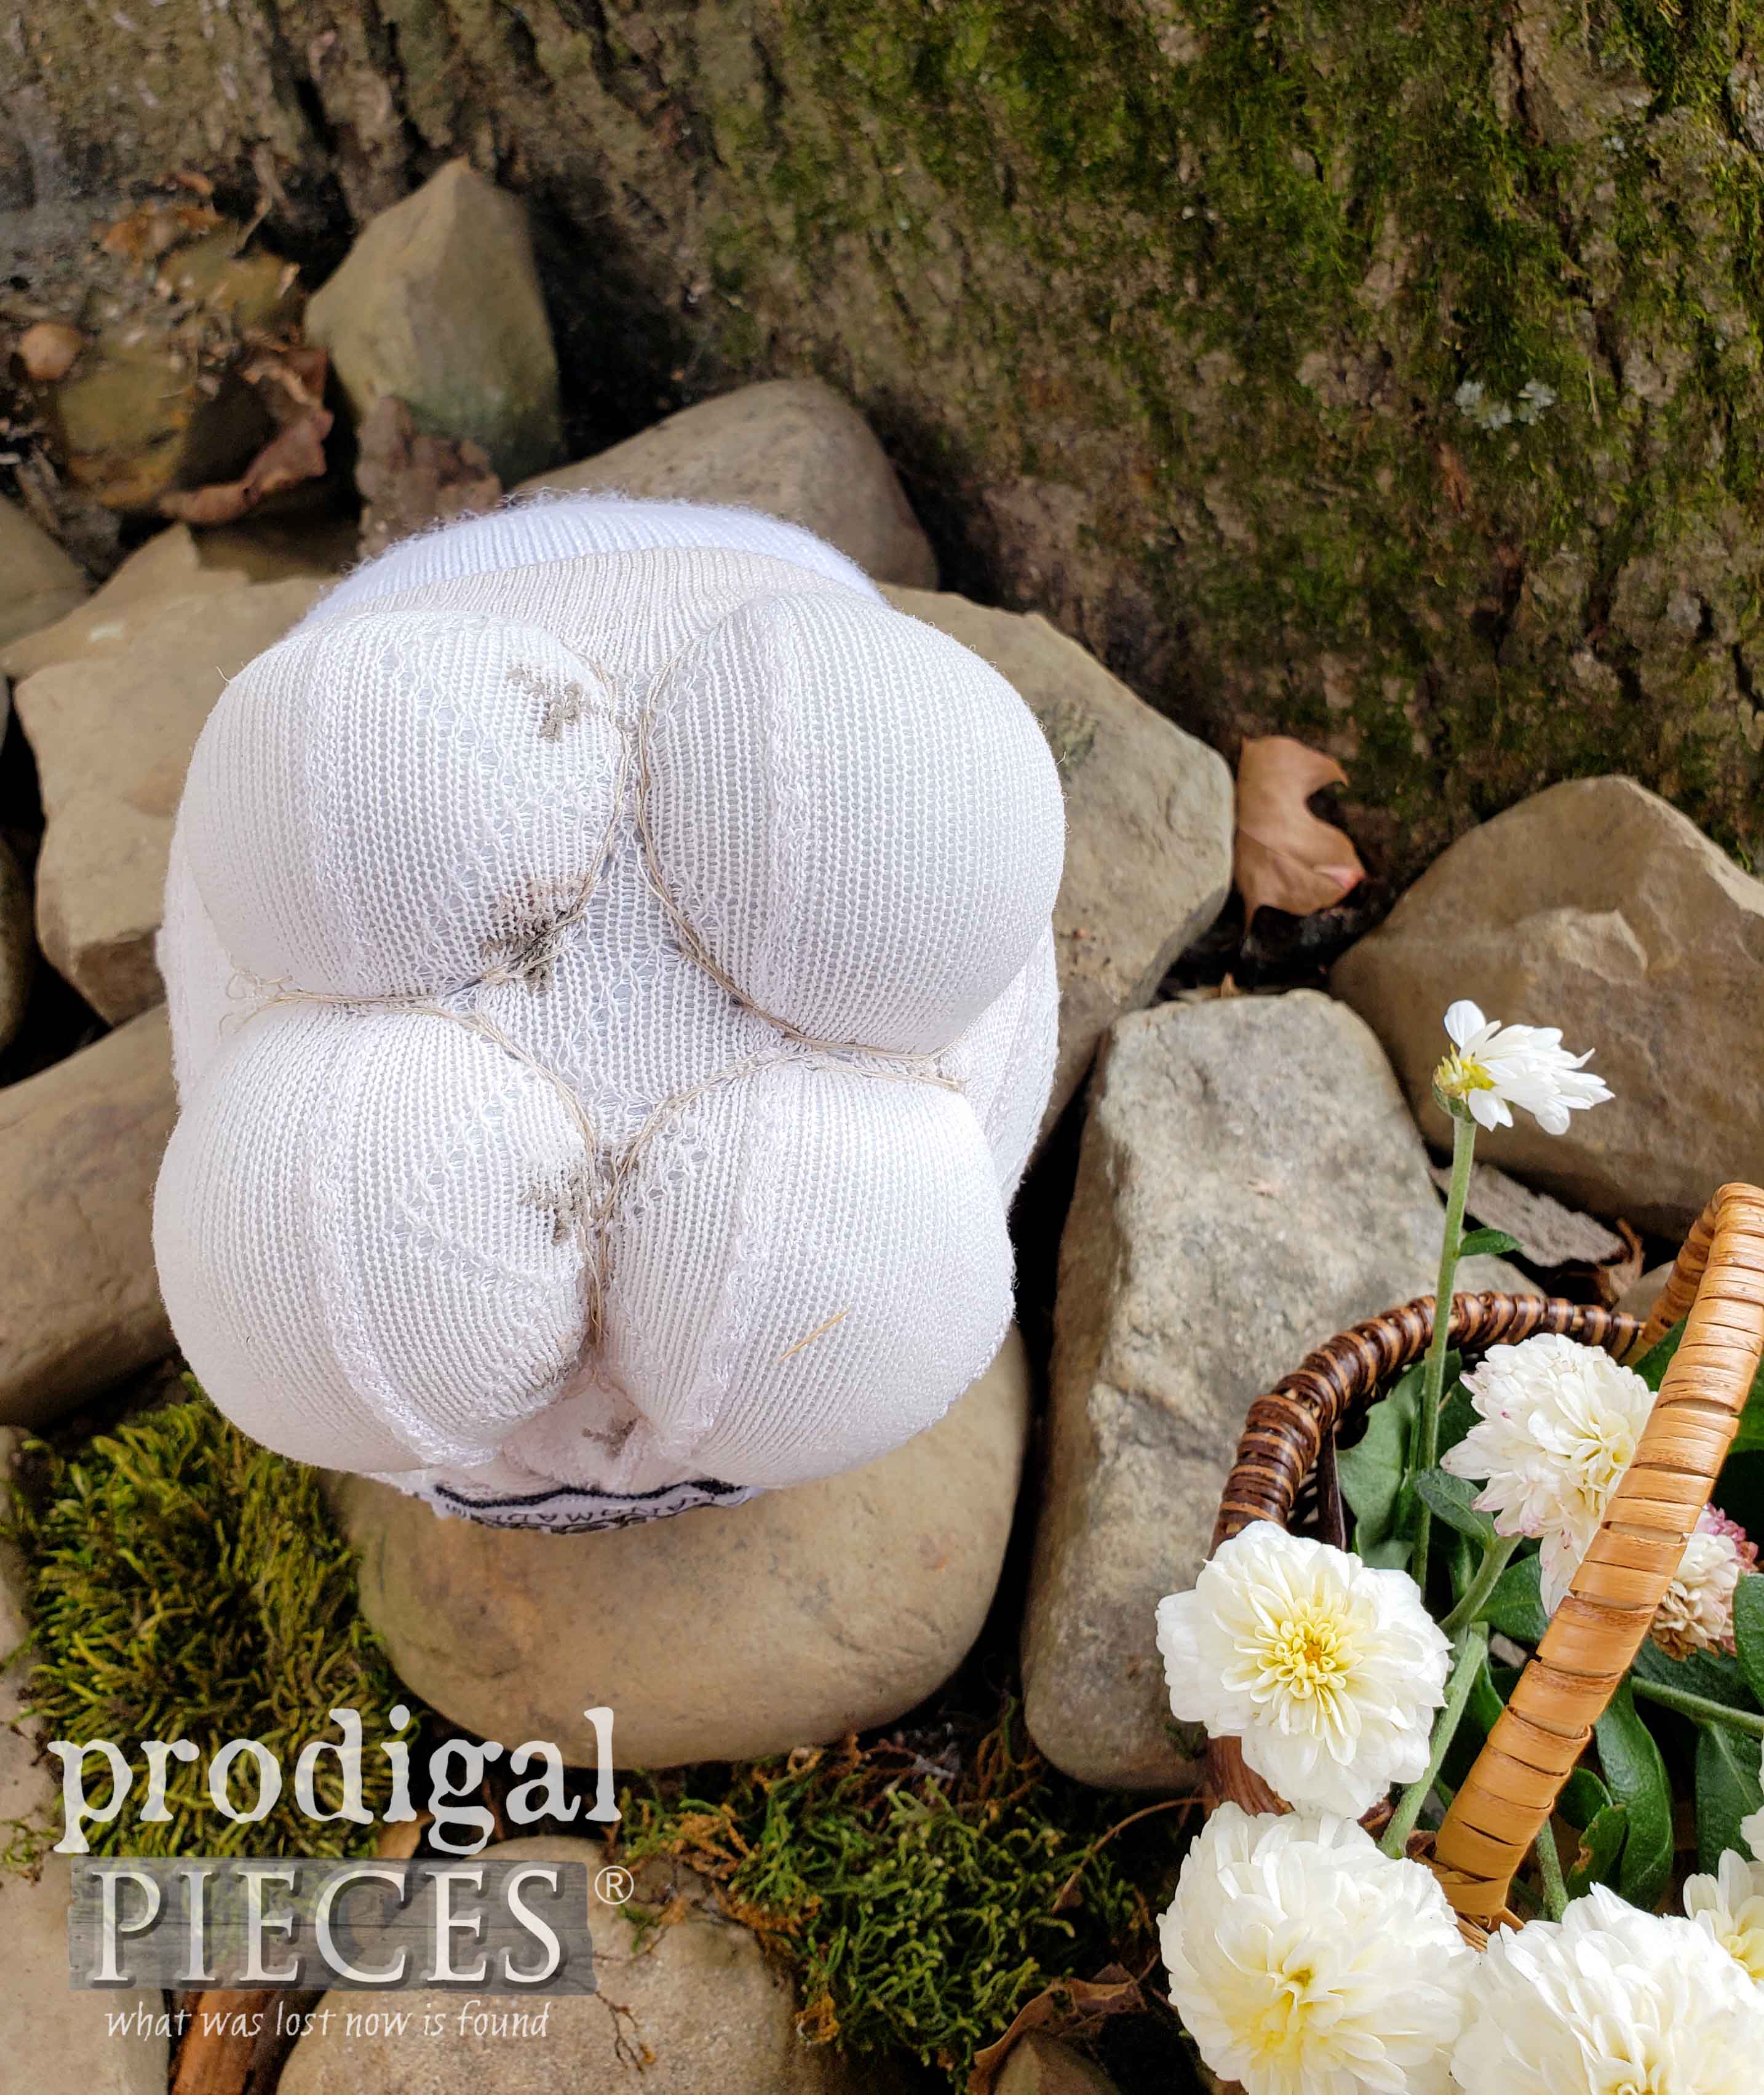 Sock Doll Pig Feet | prodigalpieces.com #prodigalpieces #handmade #toy #doll #sewing #crafts